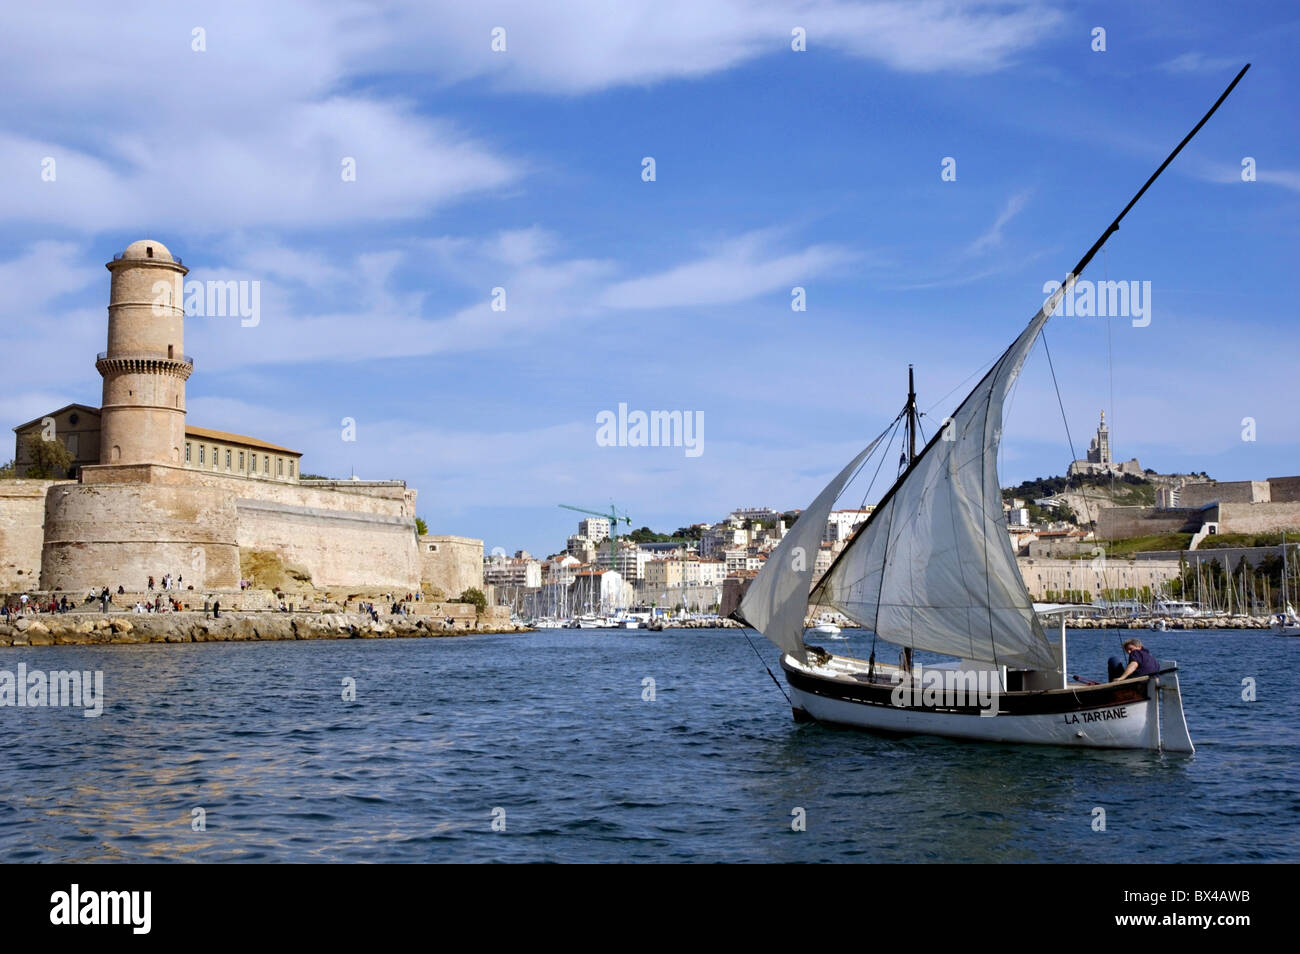 Man sailing in a yacht with Saint Jean Fort in the background, Marseille, France. Stock Photo